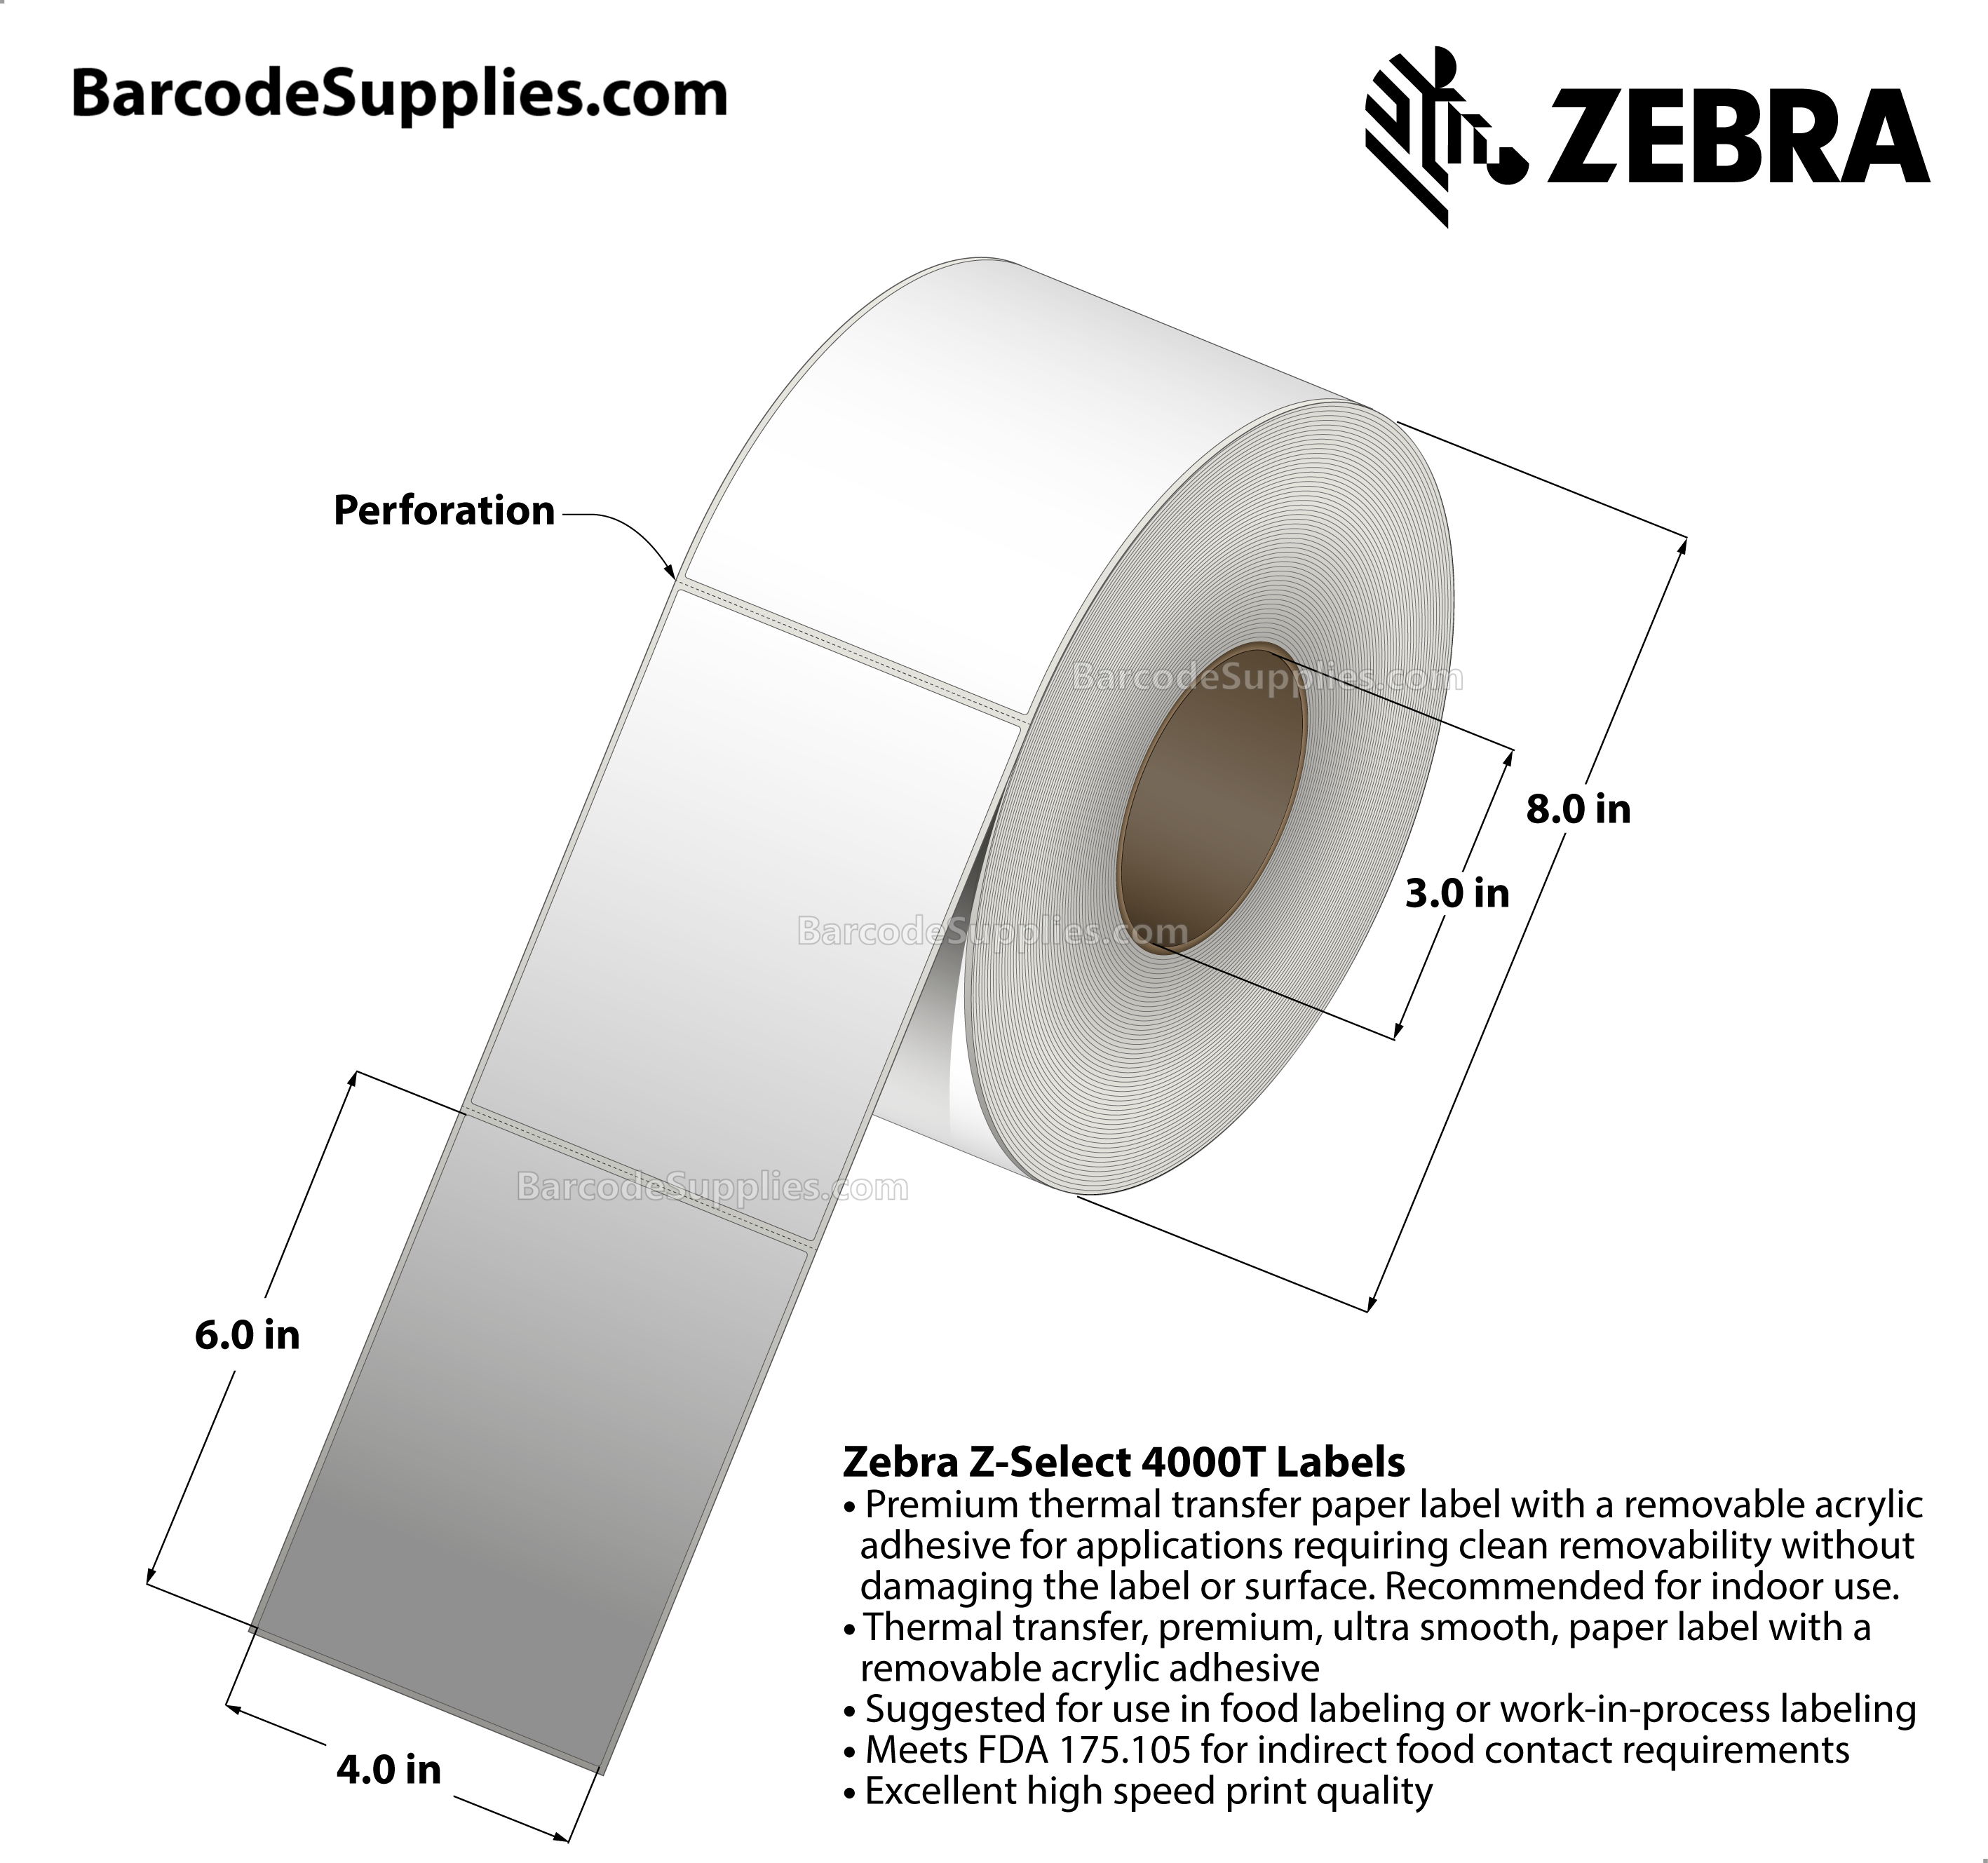 4 x 6 Thermal Transfer White Z-Select 4000T Removable Labels With Removable Adhesive - Perforated - 1000 Labels Per Roll - Carton Of 4 Rolls - 4000 Labels Total - MPN: 10005486